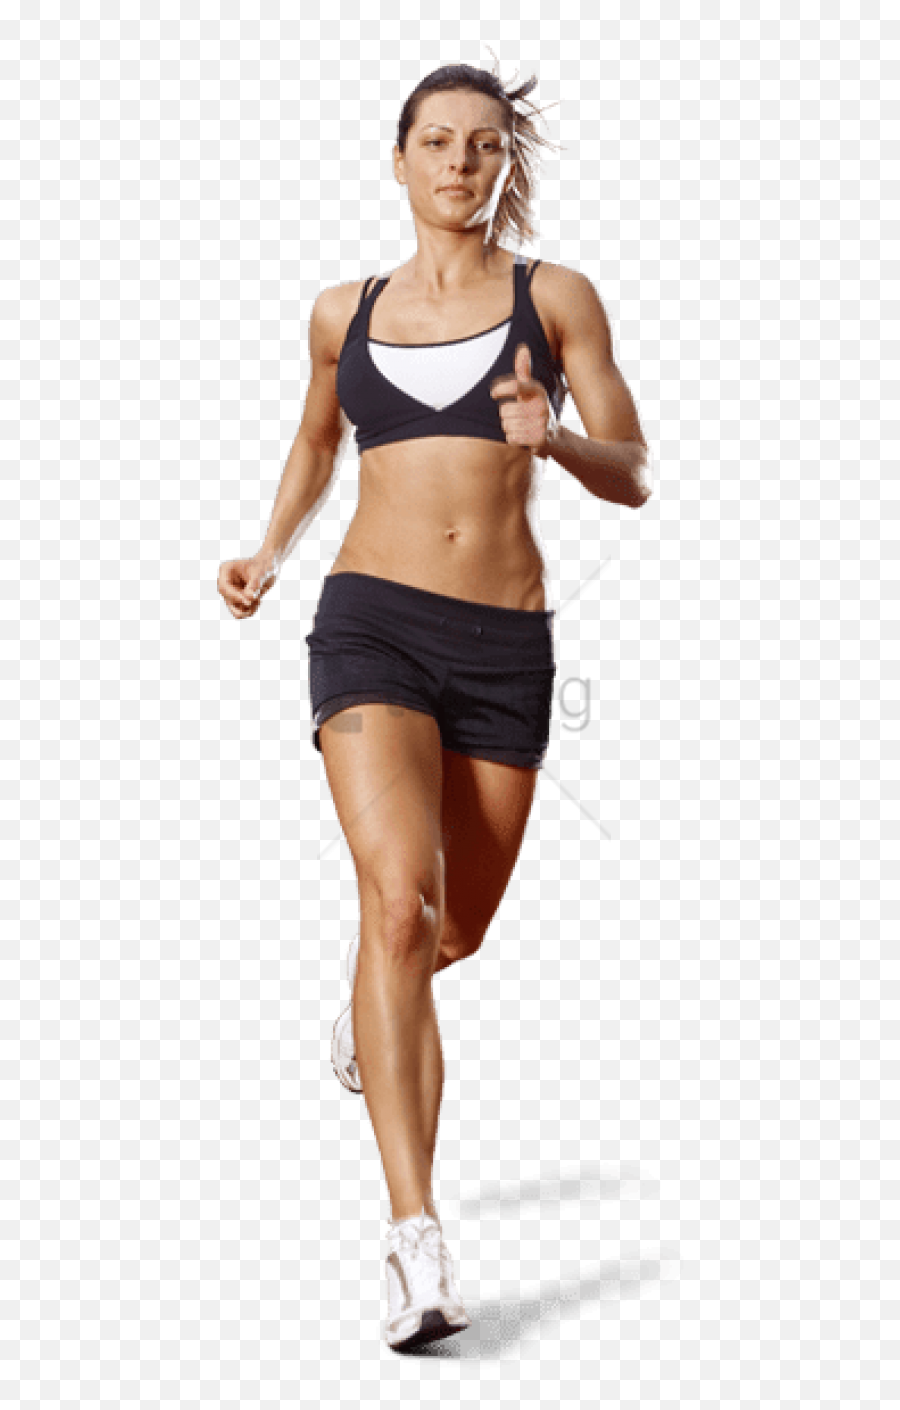 Download Free Png Download Running Woman Front Png Images - Overused Knee Emoji,Person Running Png